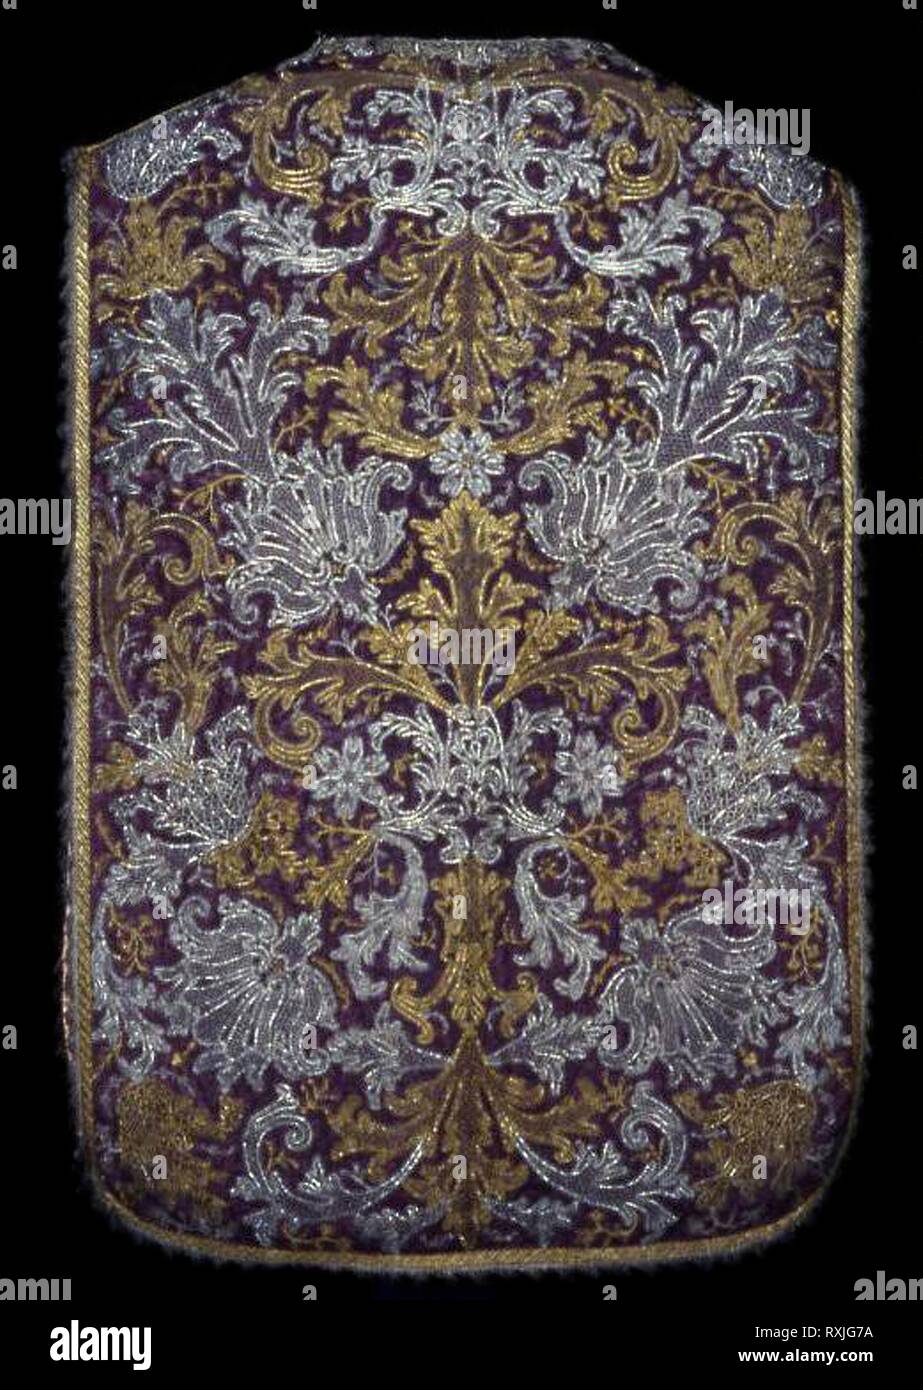 Chasuble. Italy, probably Turin. Date: 1710-1730. Dimensions: 100.4 x 68.6 cm (41 x 27 in.). Silk, warp-faced weft-ribbed plain weave; underlaid with linen, plain weave; appliquéd with gilt- and silvered-metal strips and metal-strip-wrapped silk, bobbin part lace; embroidered with silk, gilt- and silvered-metal strips and wire coils, and metal-strip-wrapped silk in laid work, couching, and padded couching; edged with silvered-metal-strip-wrapped silk, warp-faced weft-ribbed plain weave with extended weft uncut fringe, and bobbin straight lace; lined with silk, plain weave. Origin: Italy. Museu Stock Photo